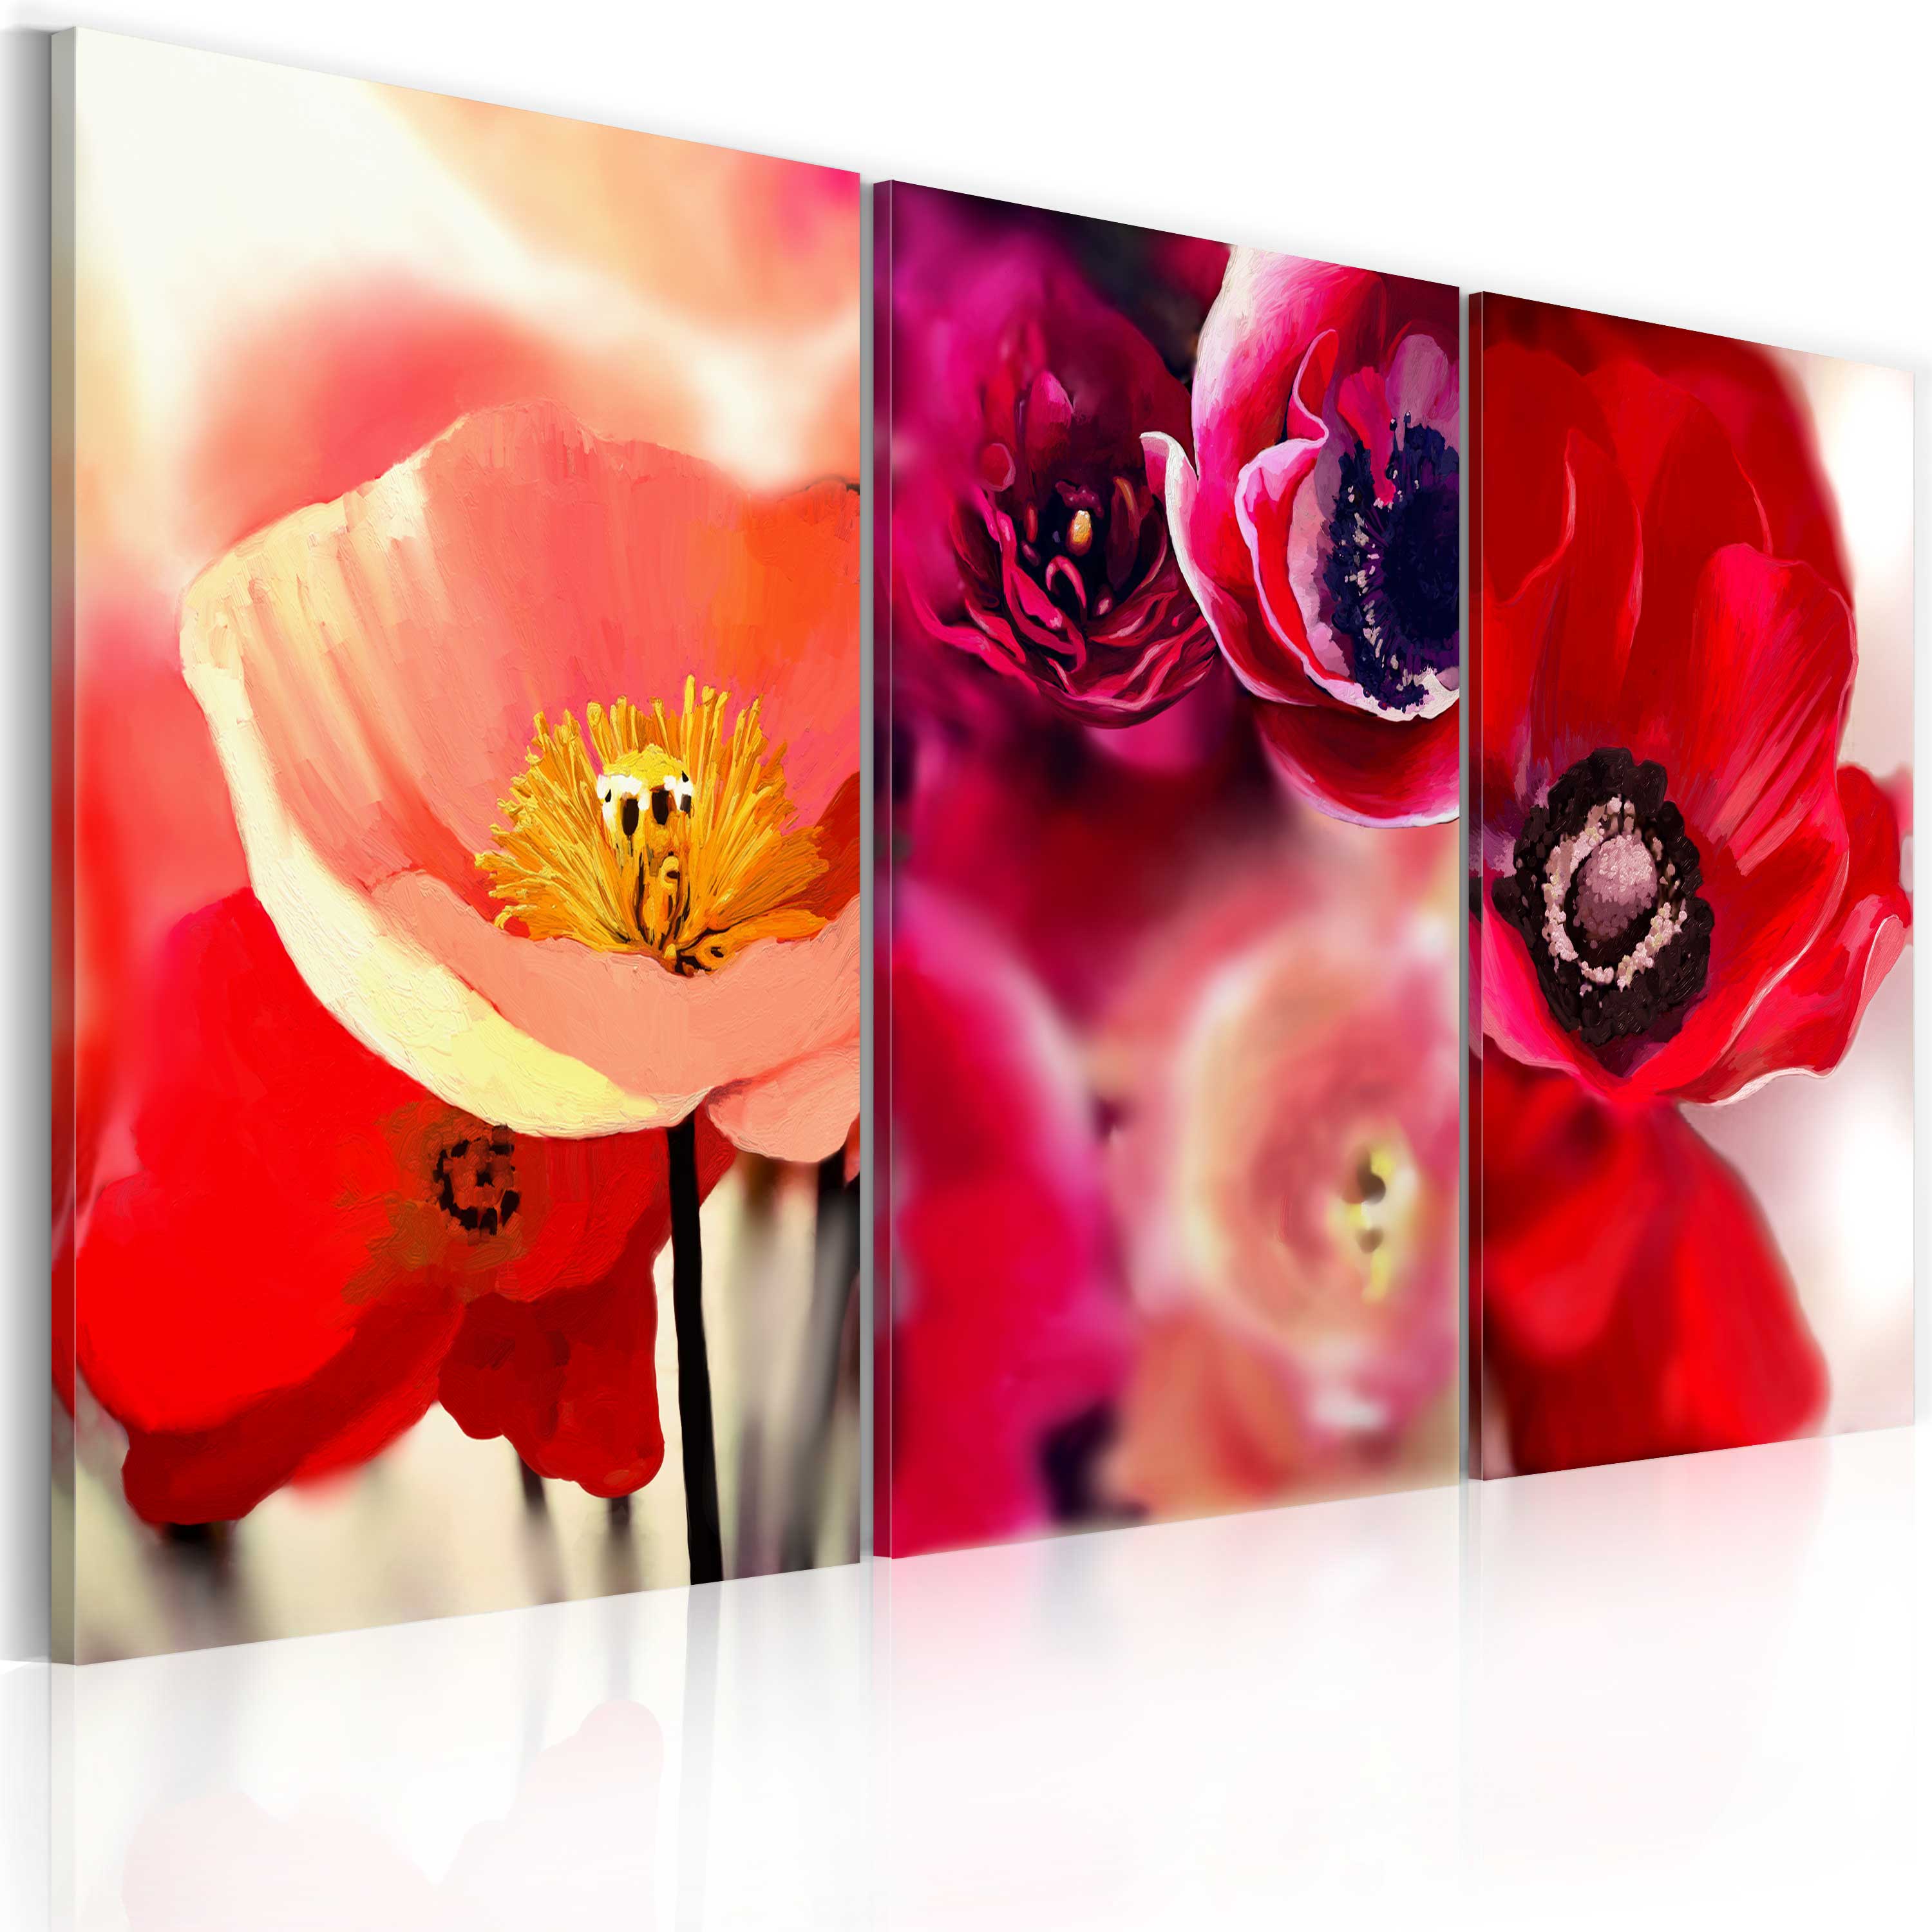 Canvas Print - Poppies - three perspectives - 60x40